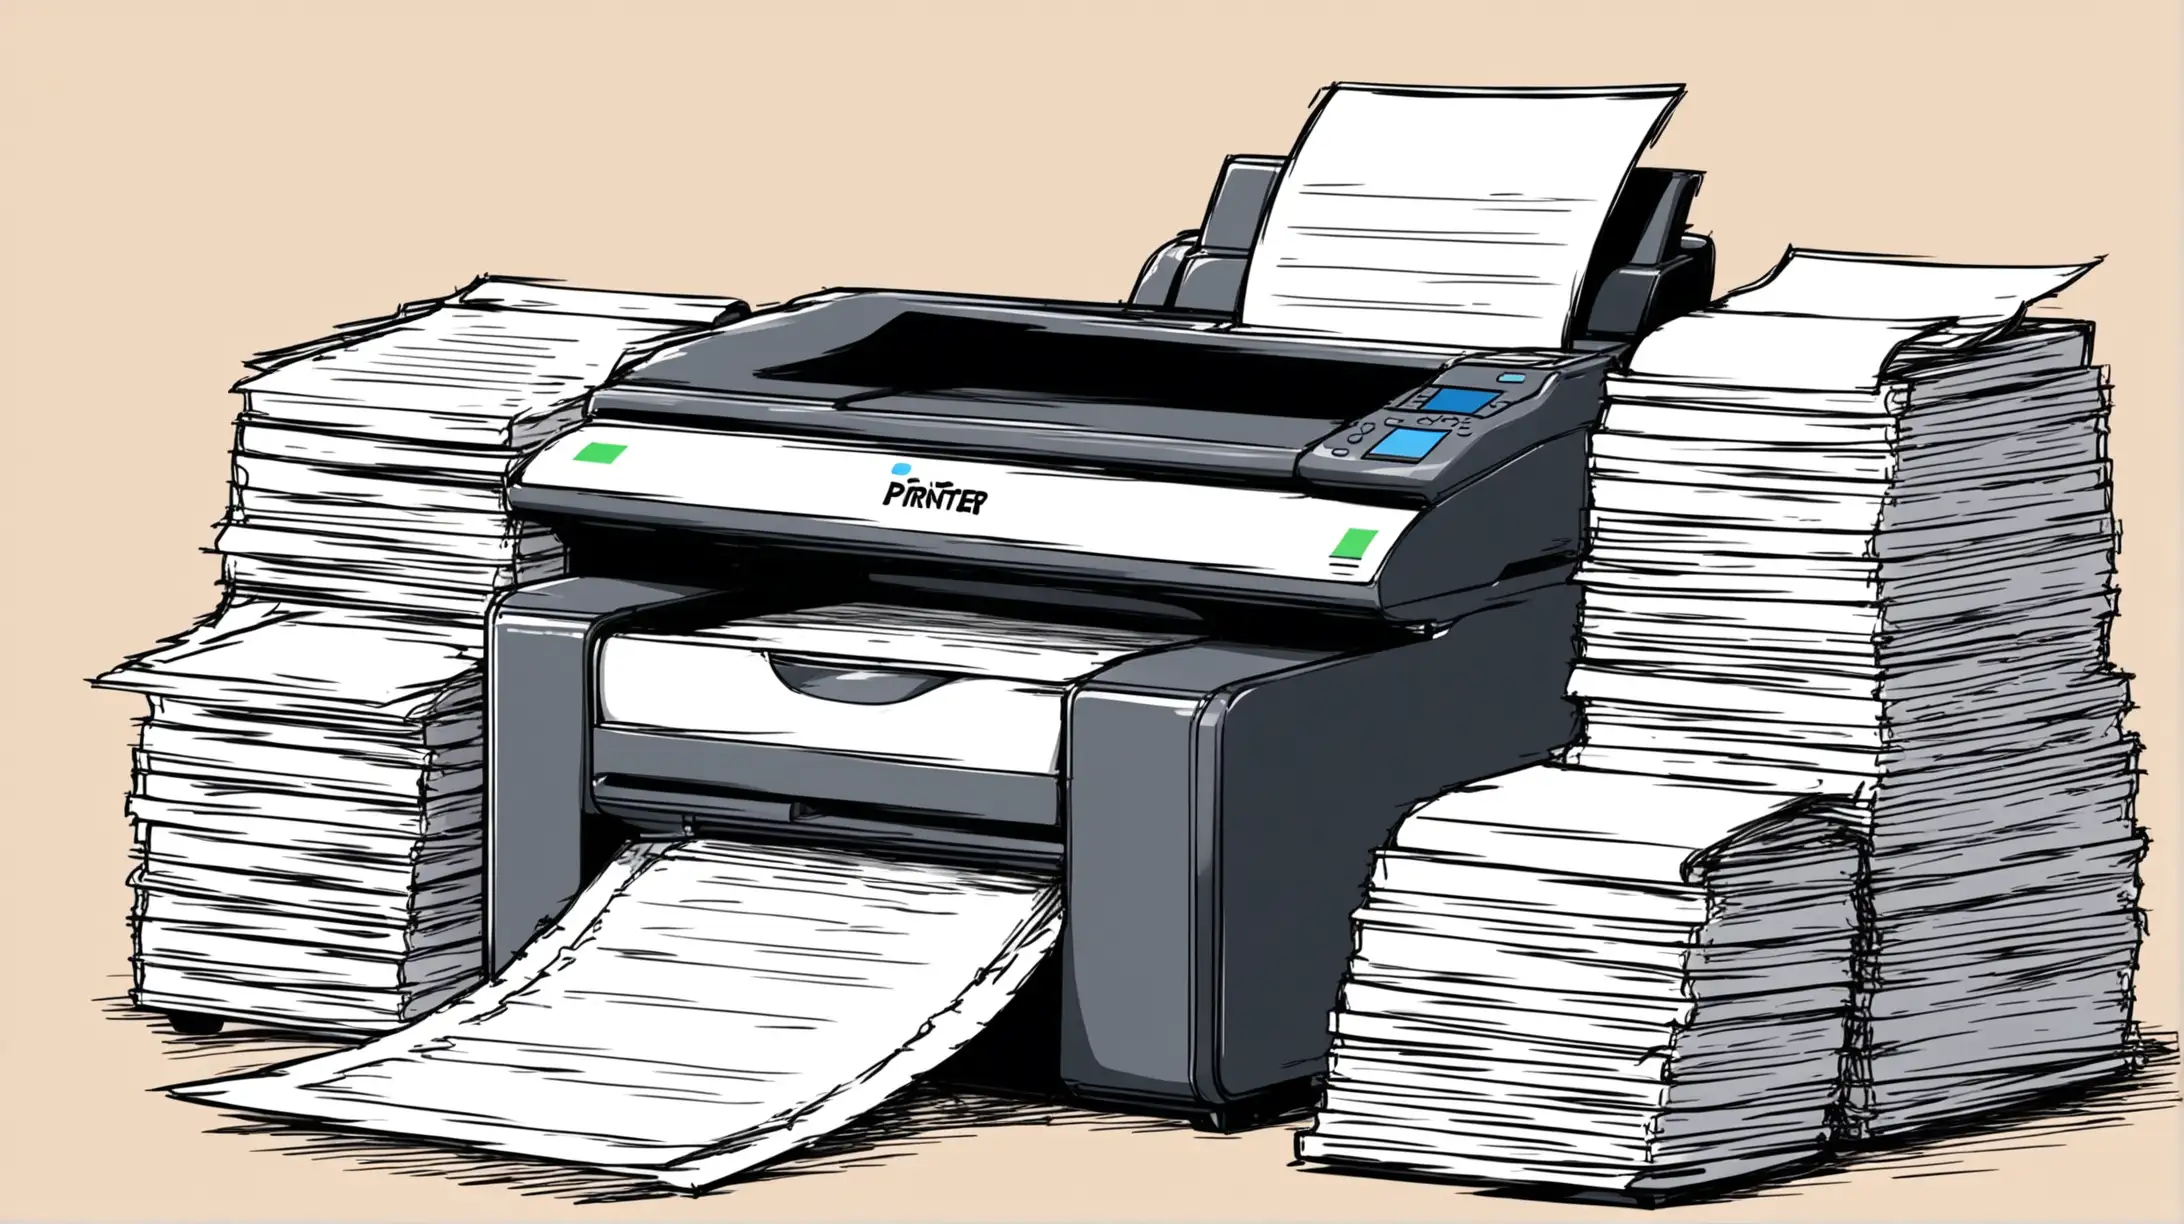 printer with paper stacked on top waiting to be collected vector cartoon sketch style

